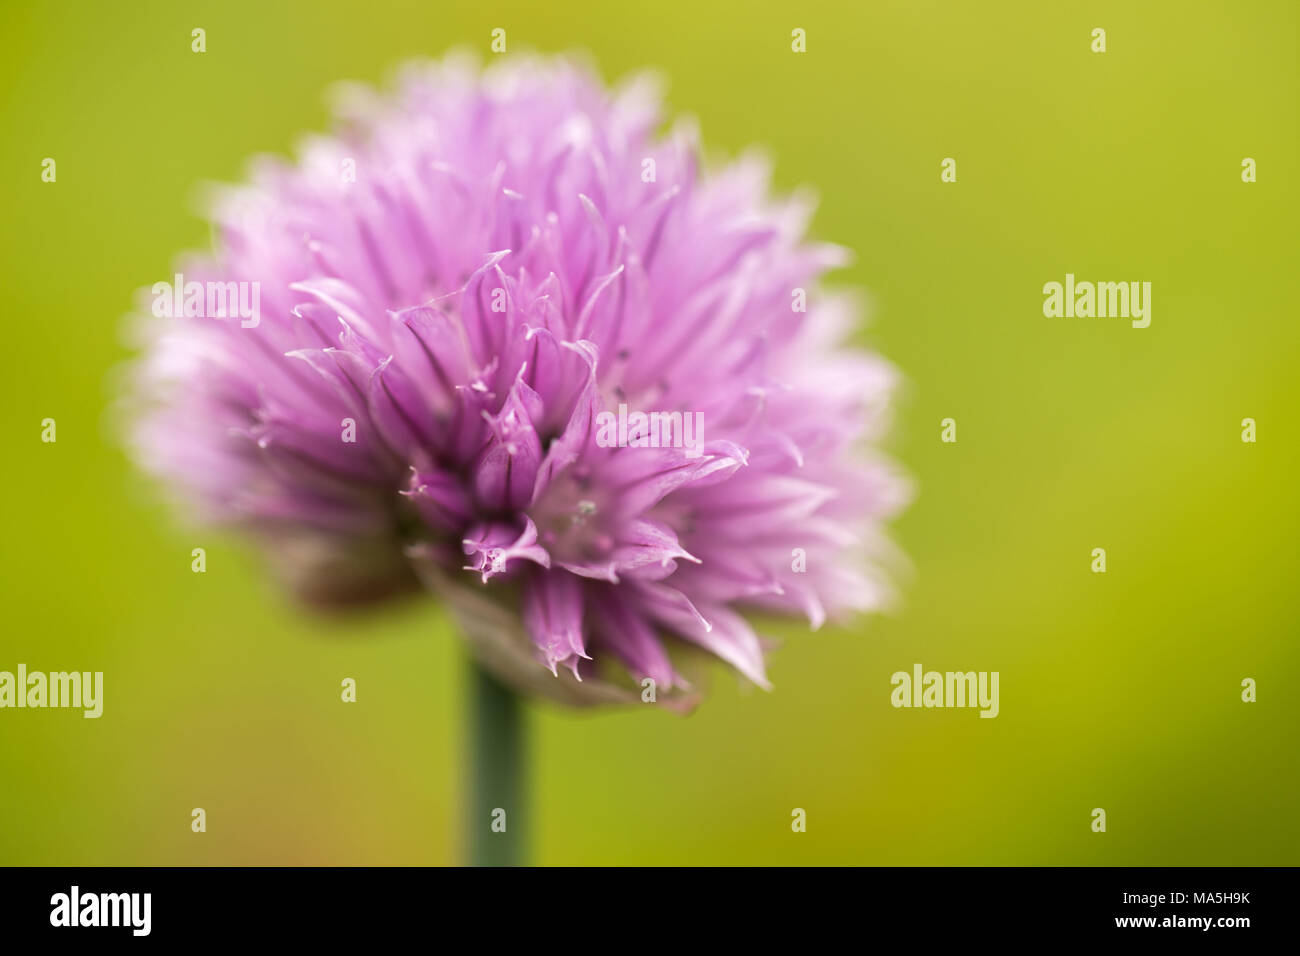 Chives with beautiful purple flowering blossom on a nature green background Stock Photo